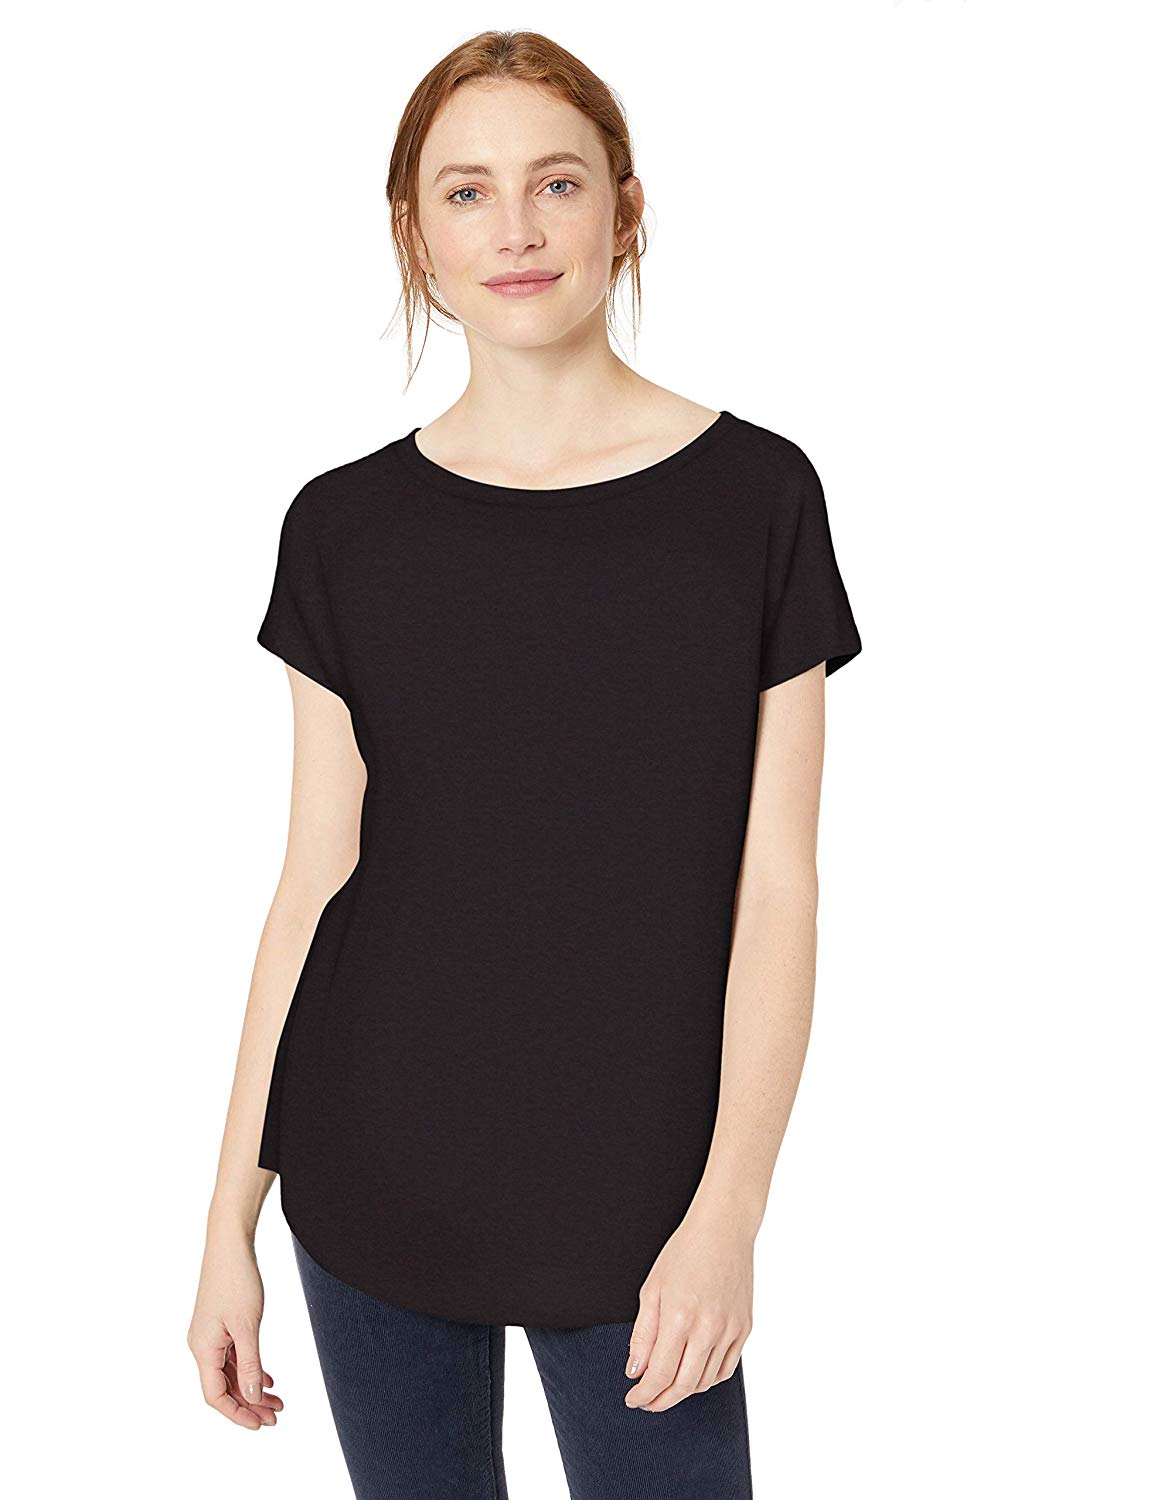 Brand Daily Ritual Womens Supersoft Terry Dolman-Sleeve Boat-Neck Shirt 